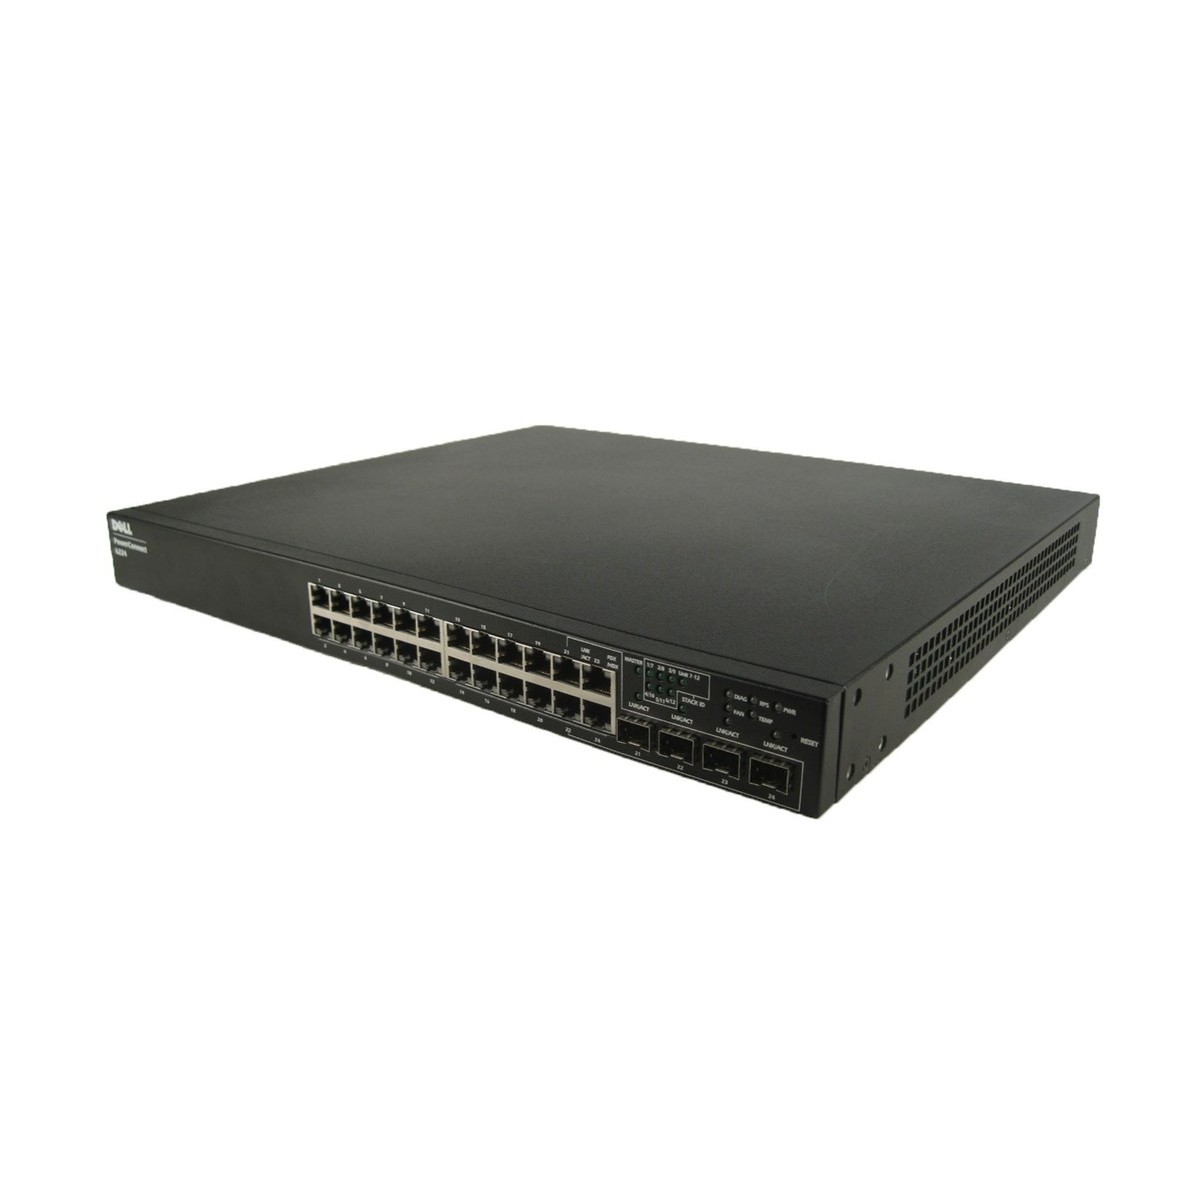 SWITCH DELL POWERCONNECT 6224 24x1GBit 4xSFP